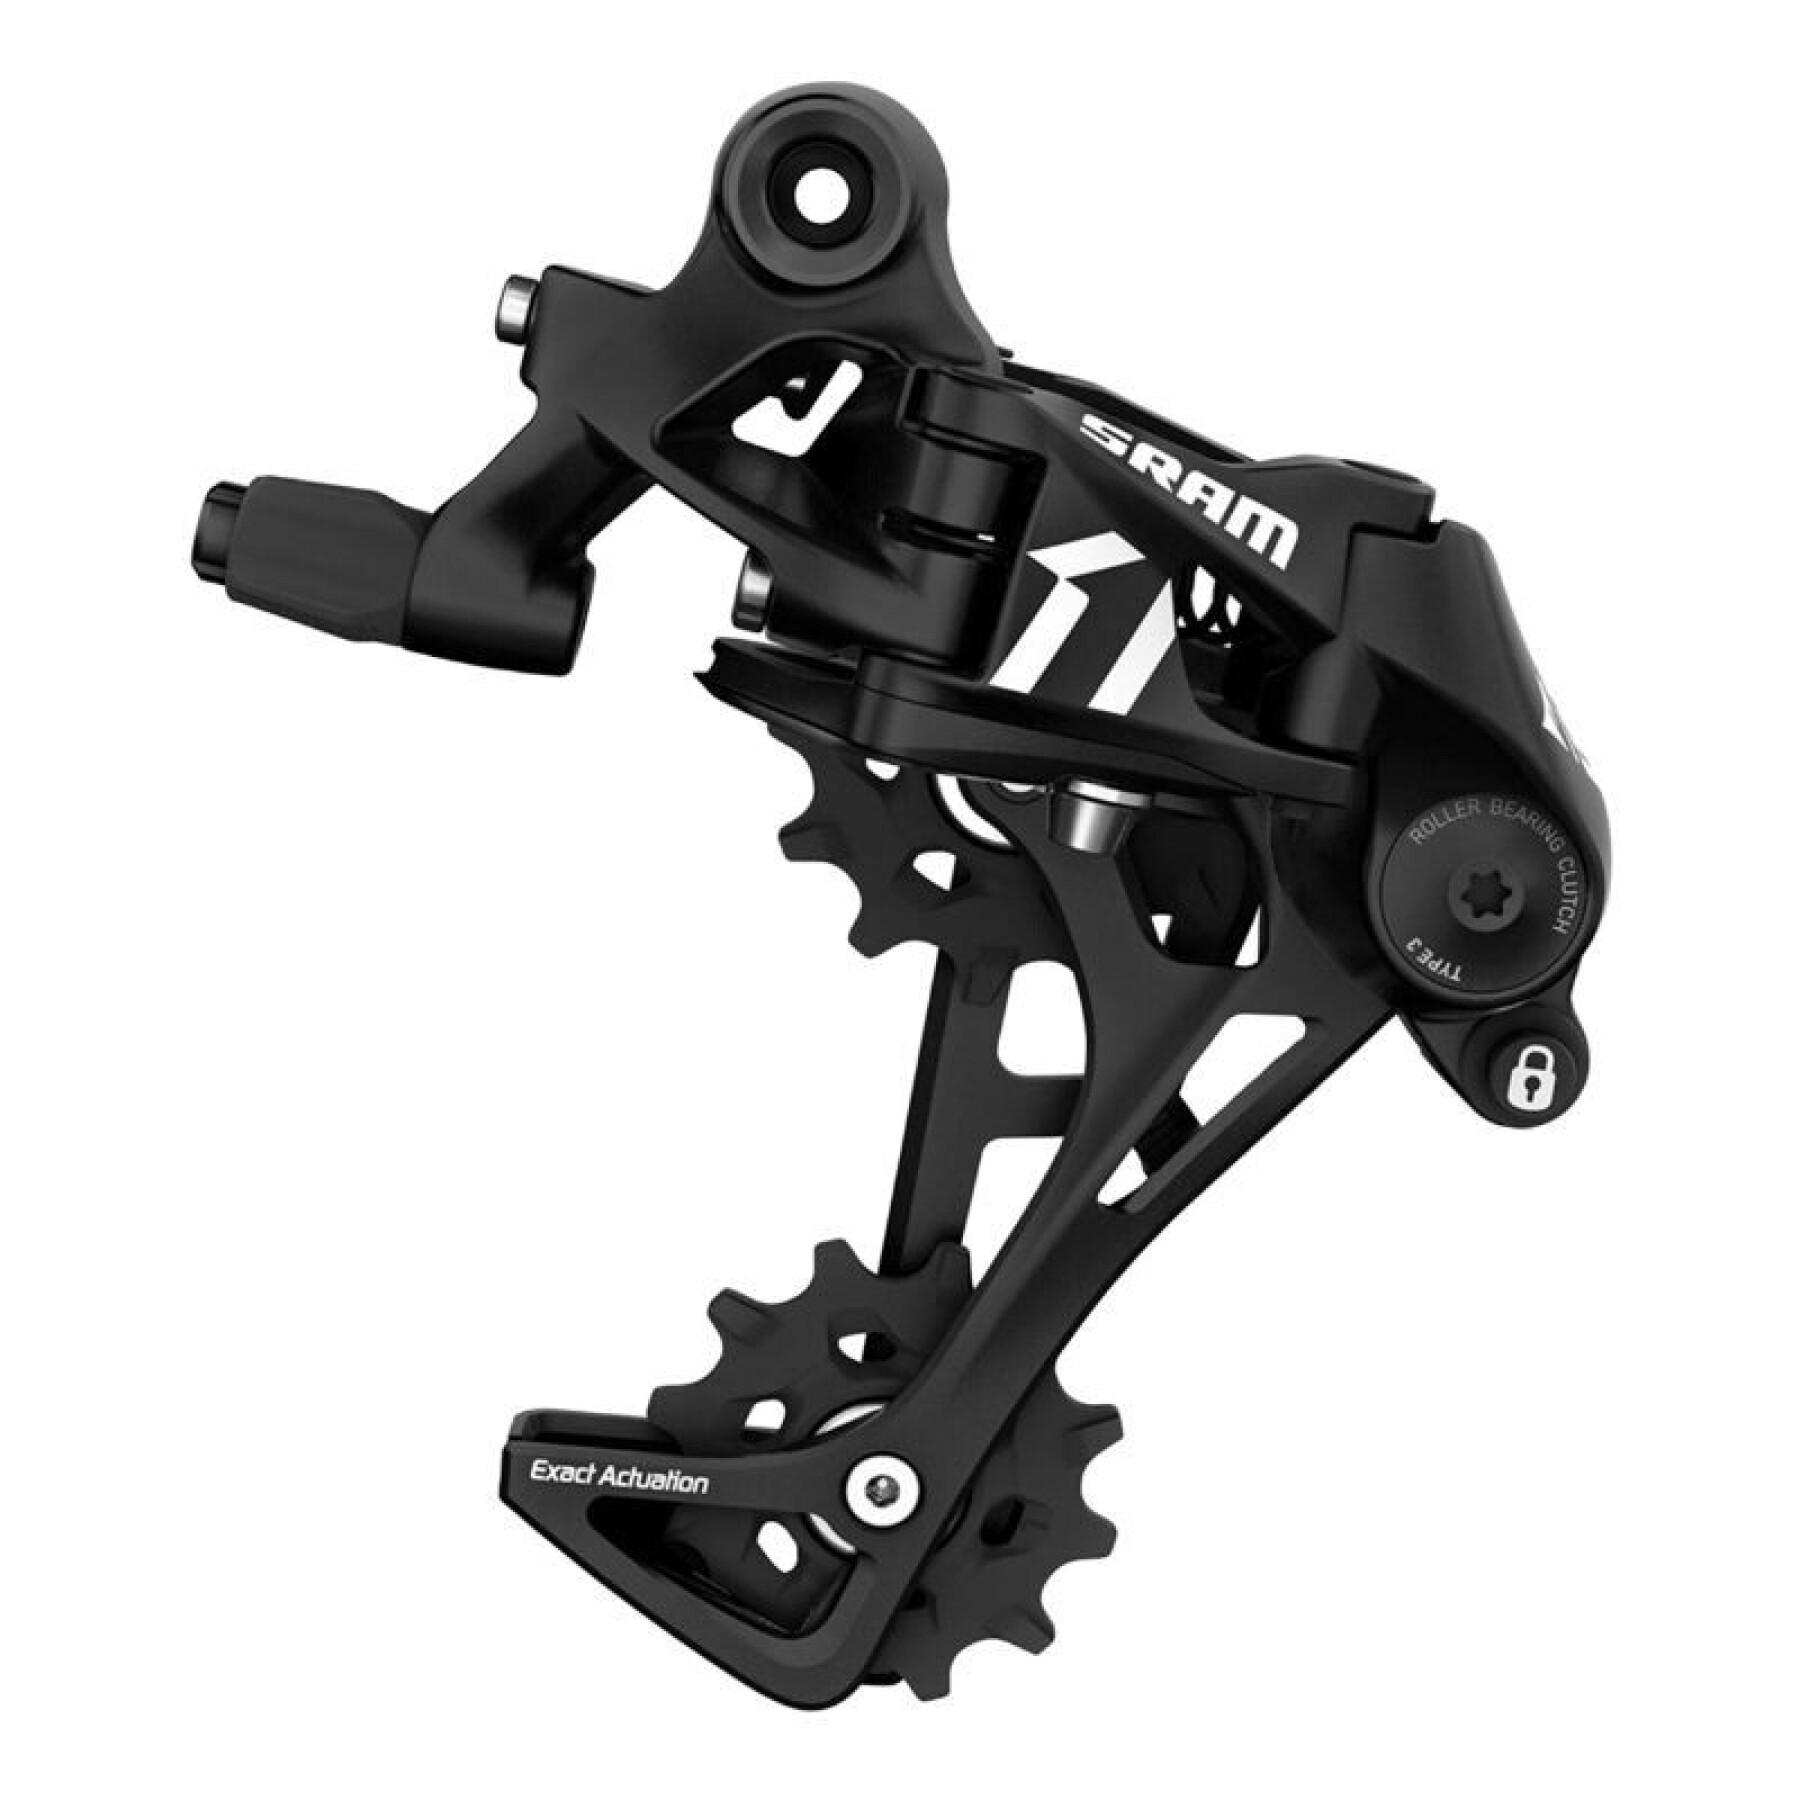 Single chainring rear derailleur with long cage Sram Apex